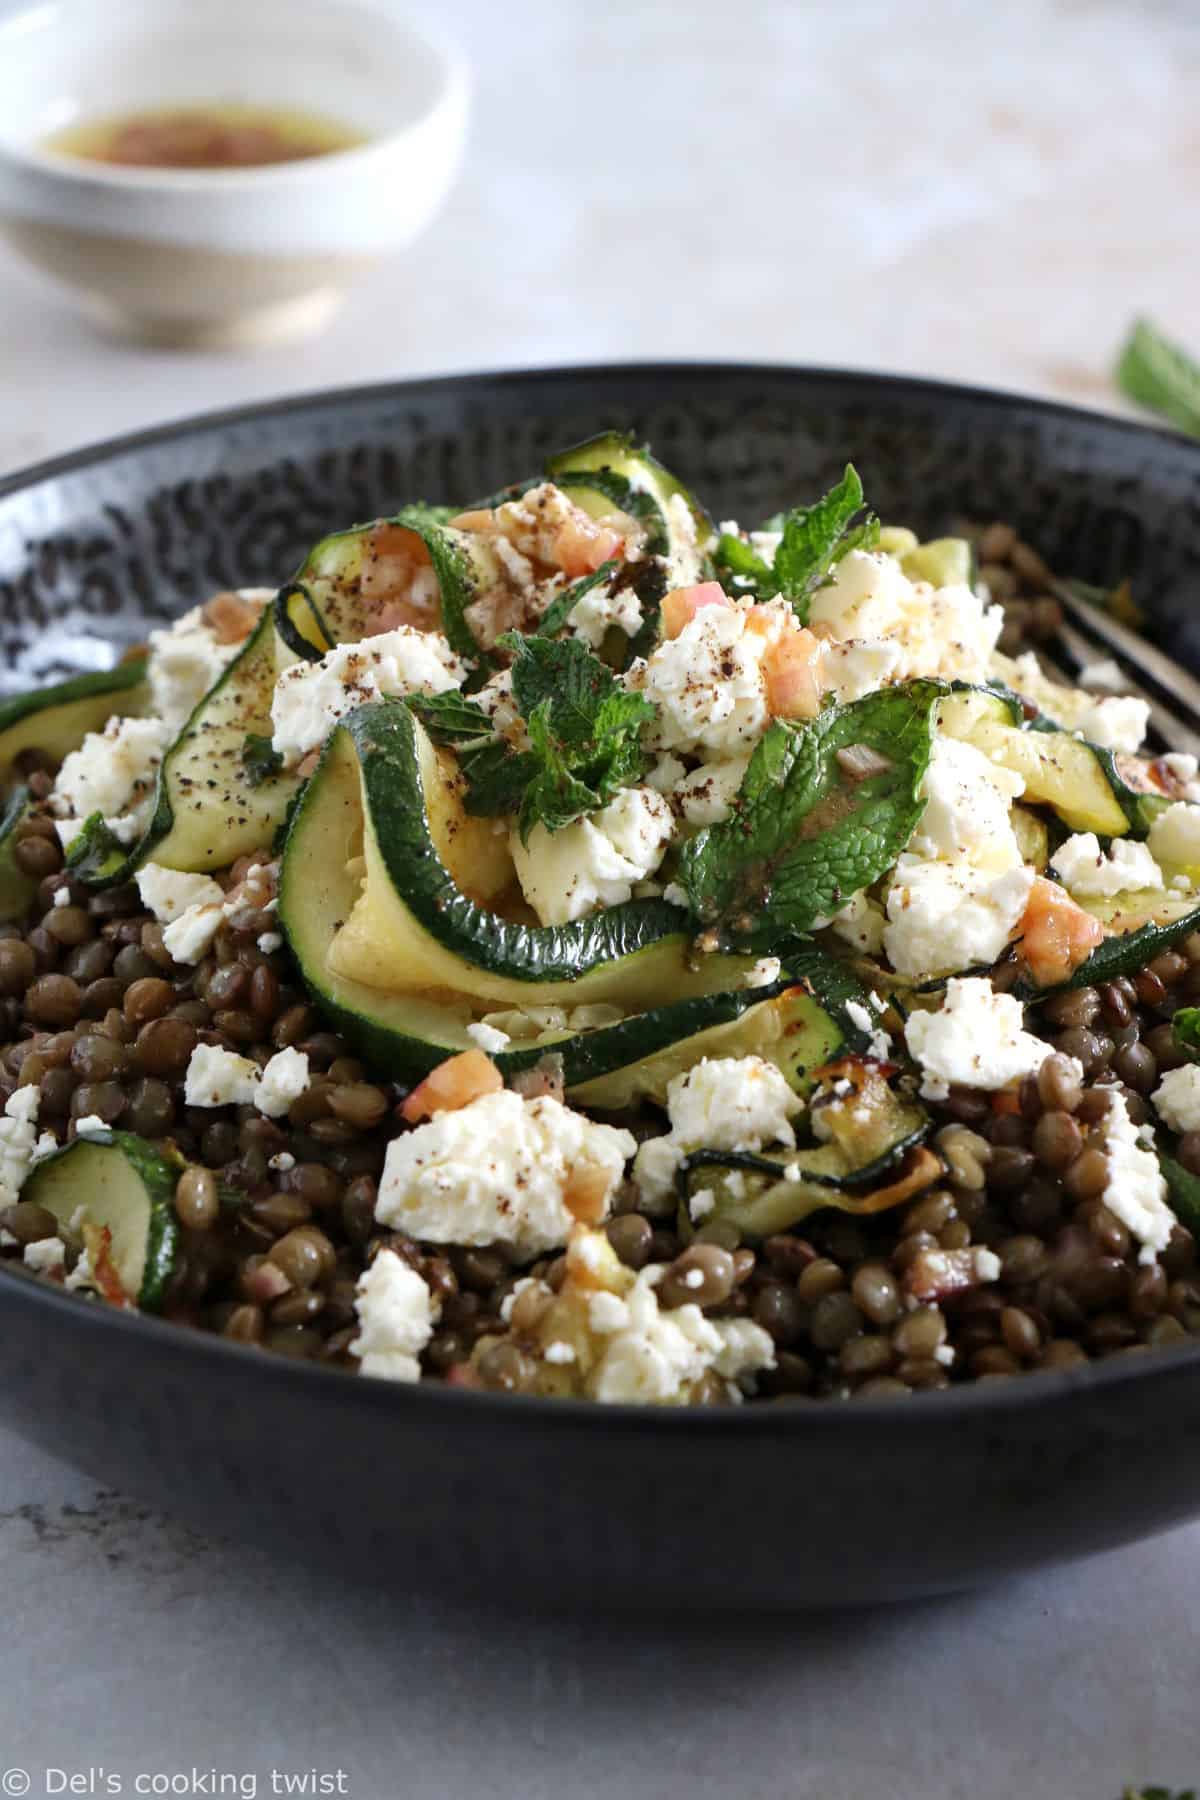 This simple lentil salad with zucchini, feta and mint is the perfect easy meal for busy days. Vegetarian, gluten-free and healthy, it's packed with wonderful refreshing flavors.